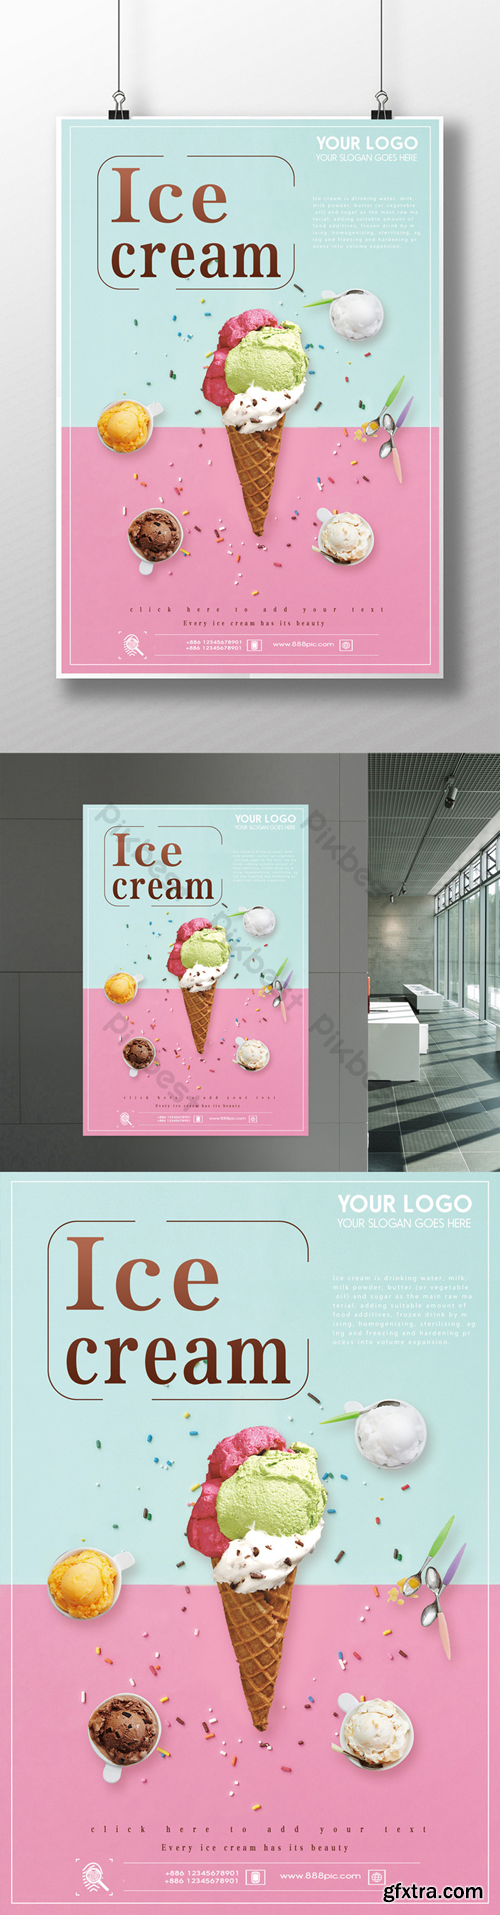 Small fresh cold drink ice cream poster design Template PSD